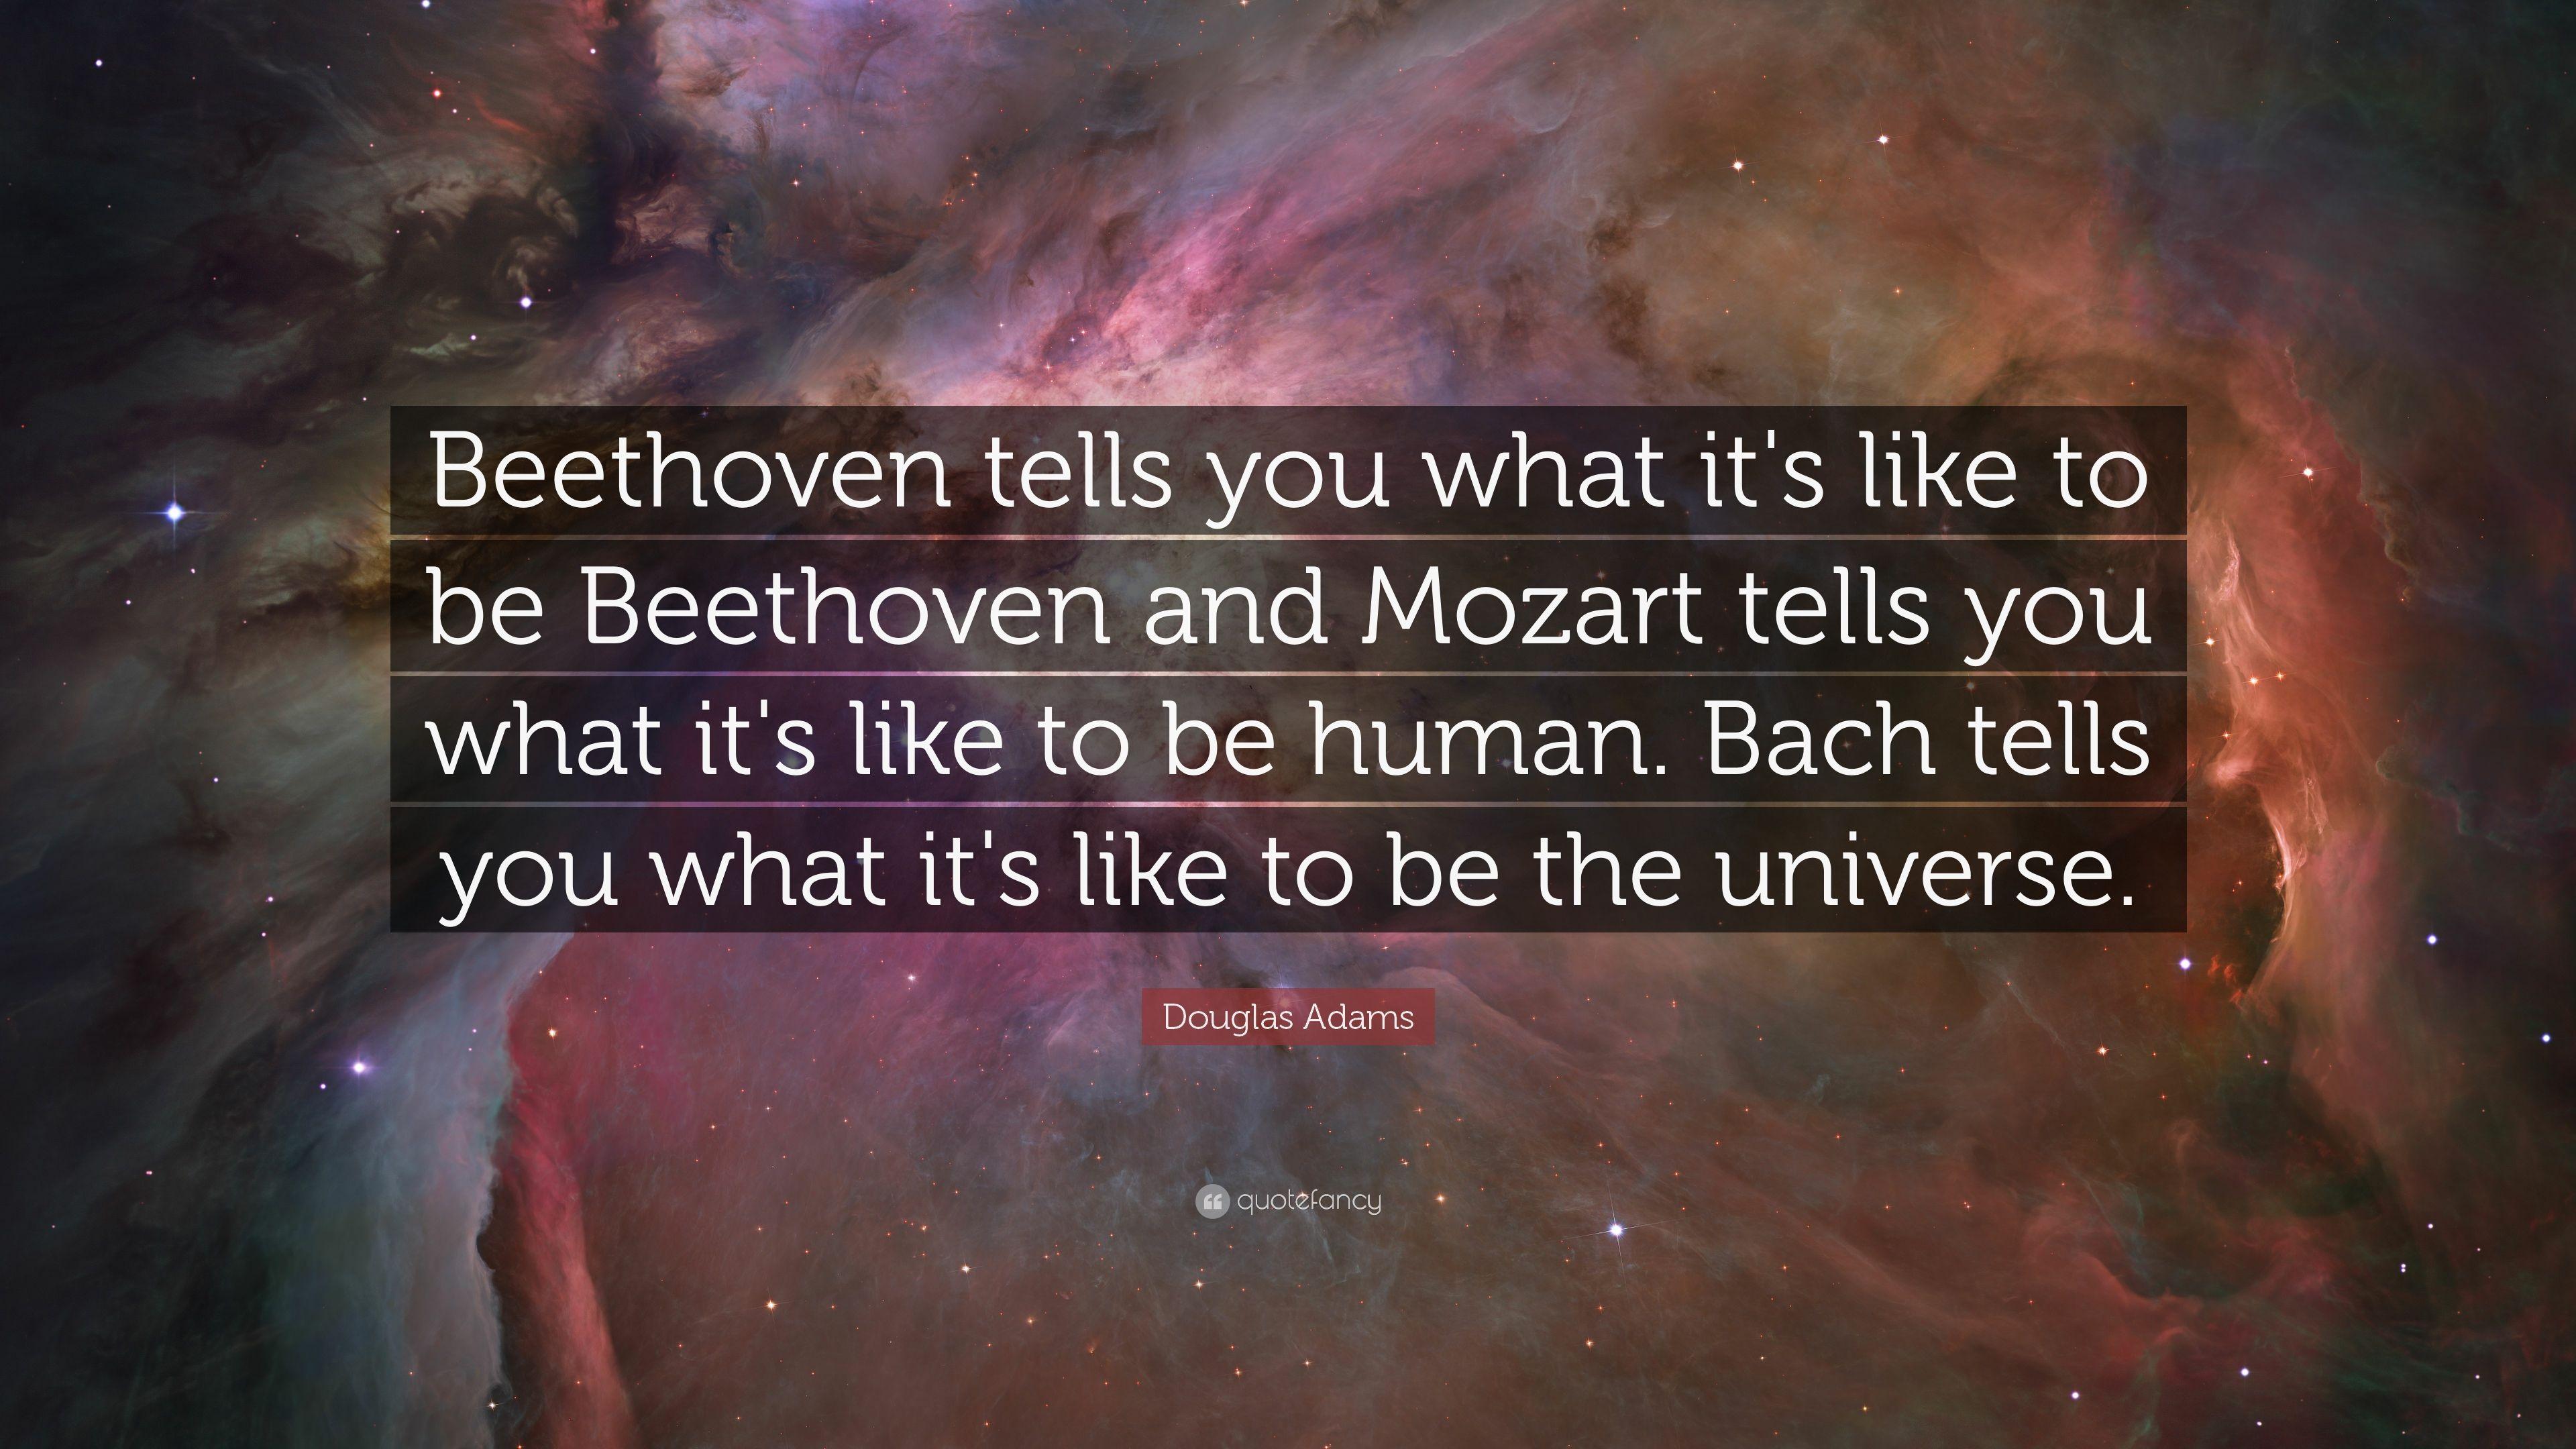 Douglas Adams Quote: “Beethoven tells you what it's like to be